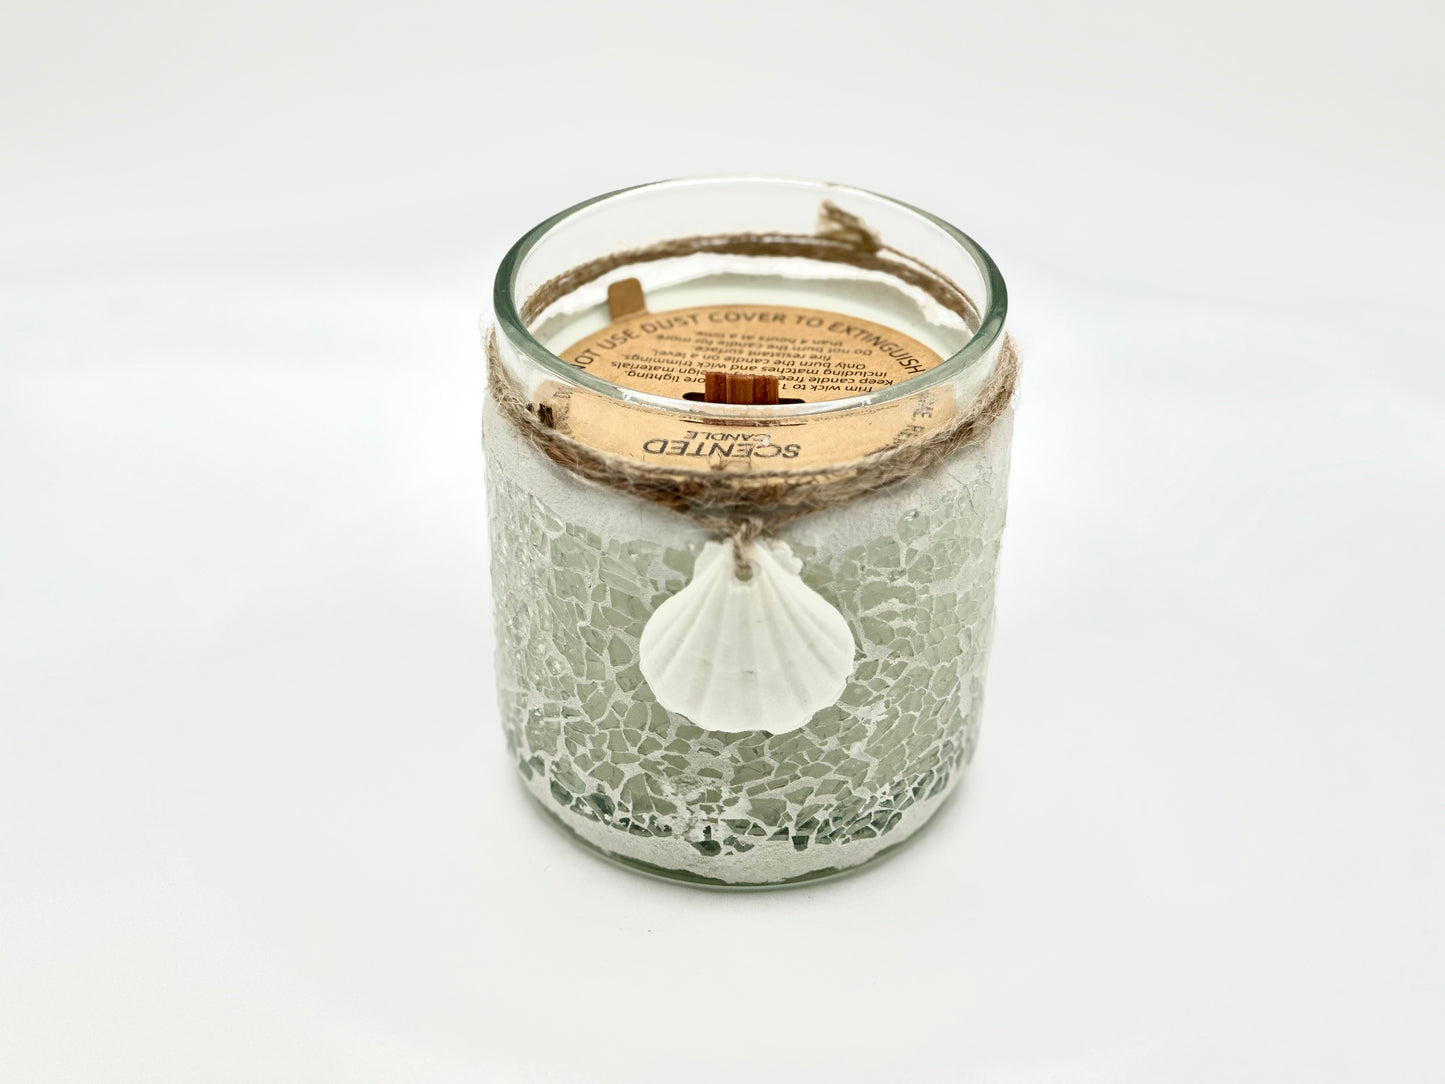 Sea Glass Candle Collection